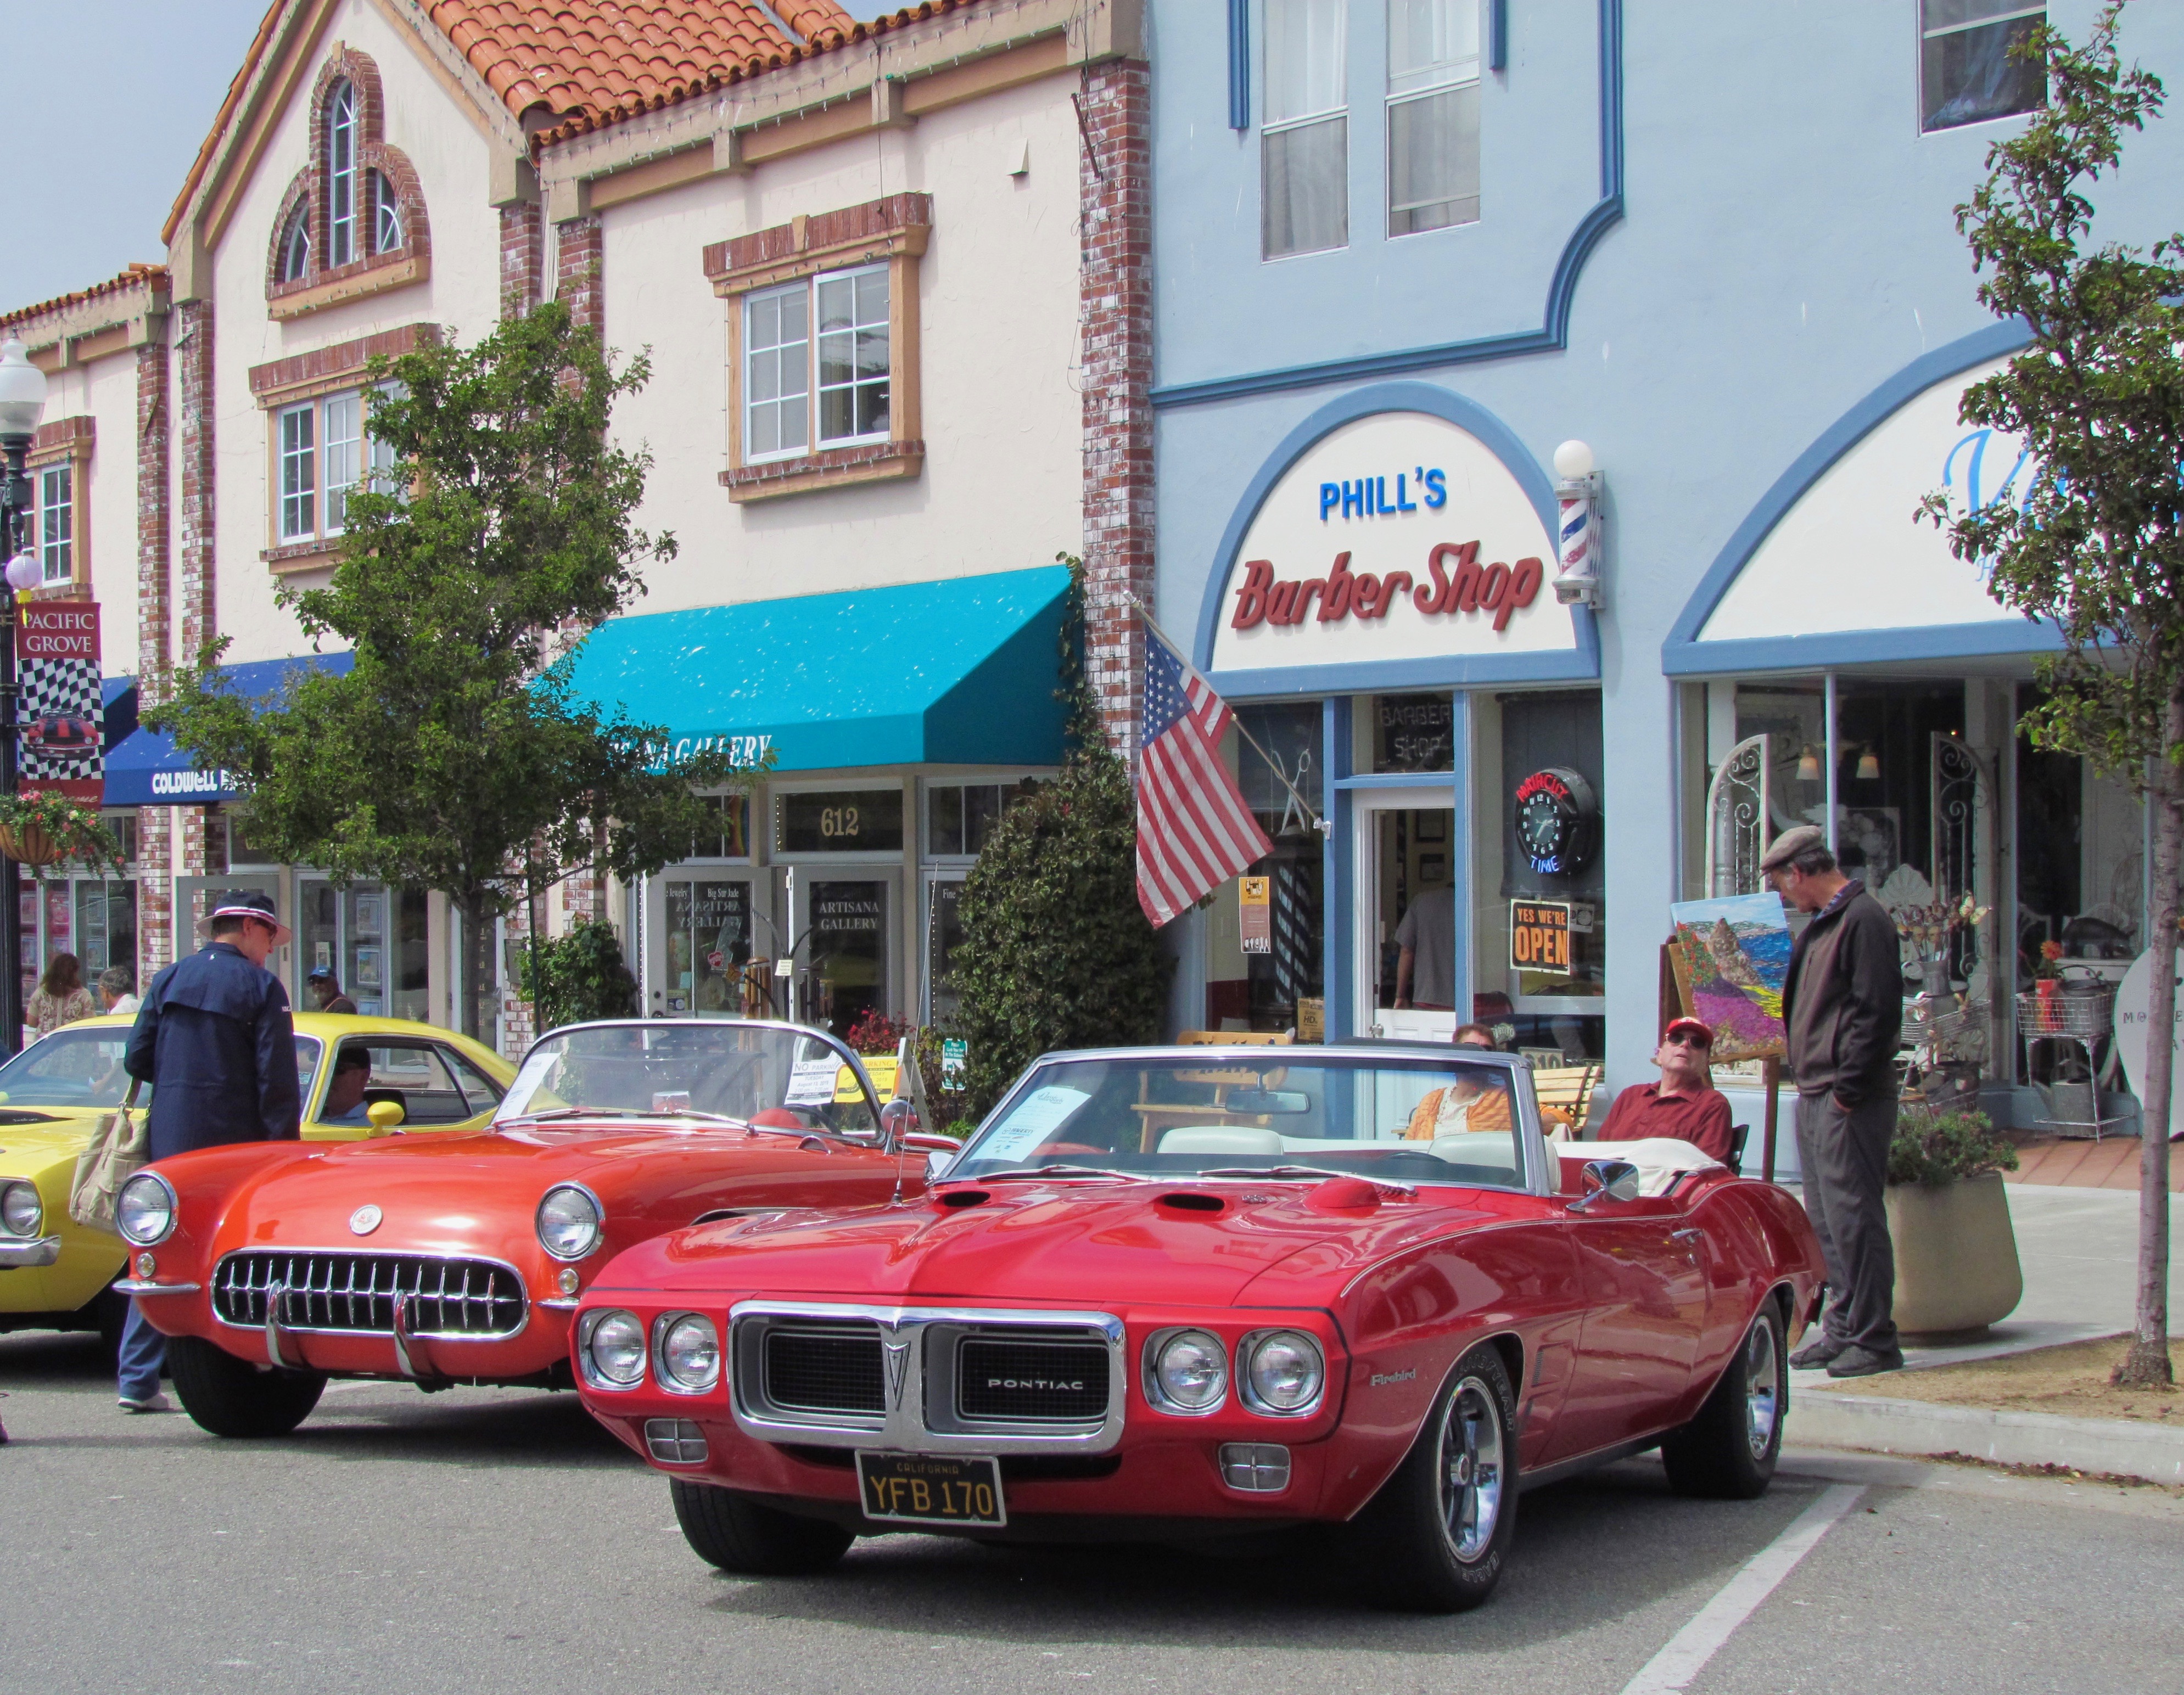 Pacific Grove, Pacific Grove grooves on its trio of Monterey Car Week shows, ClassicCars.com Journal